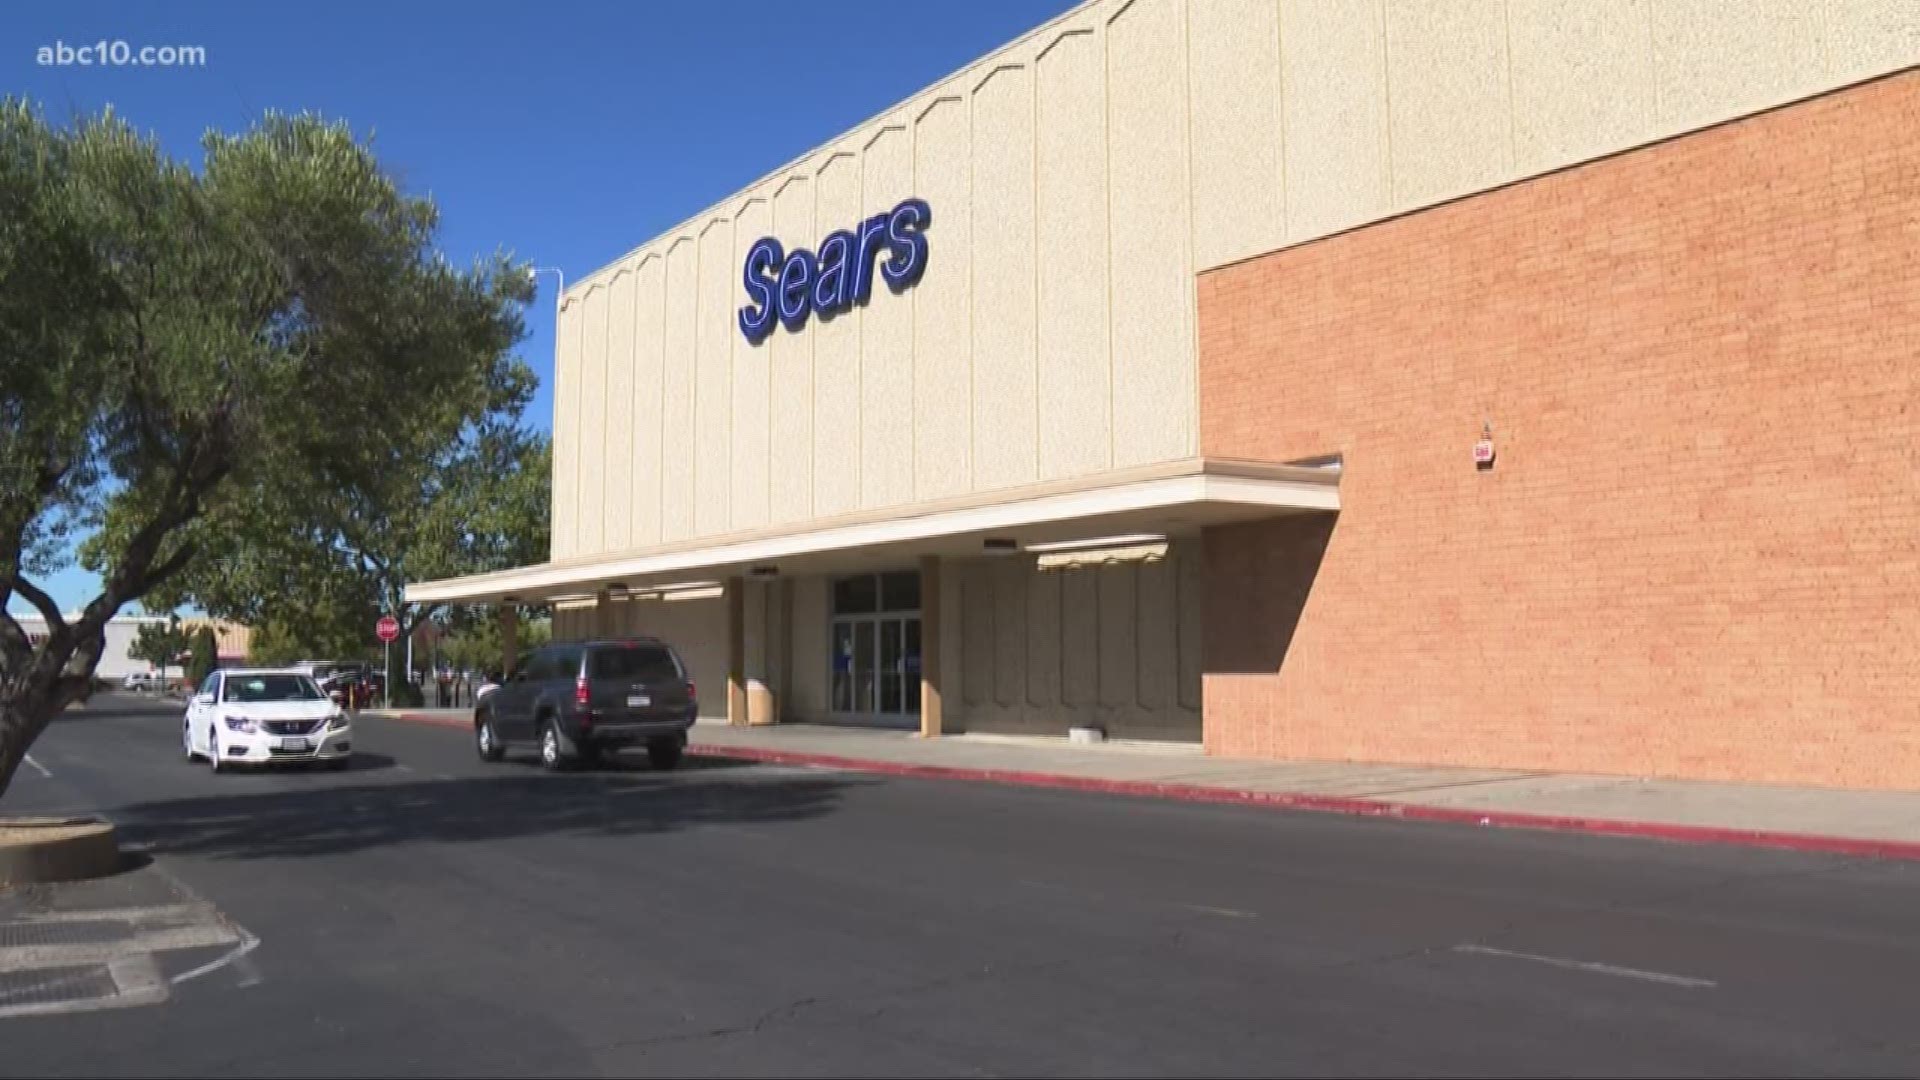 Dozens of people stopped by the Sears store on Florin Road, Tuesday, hoping to stock up on clothes and catch some of the liquidation sales.